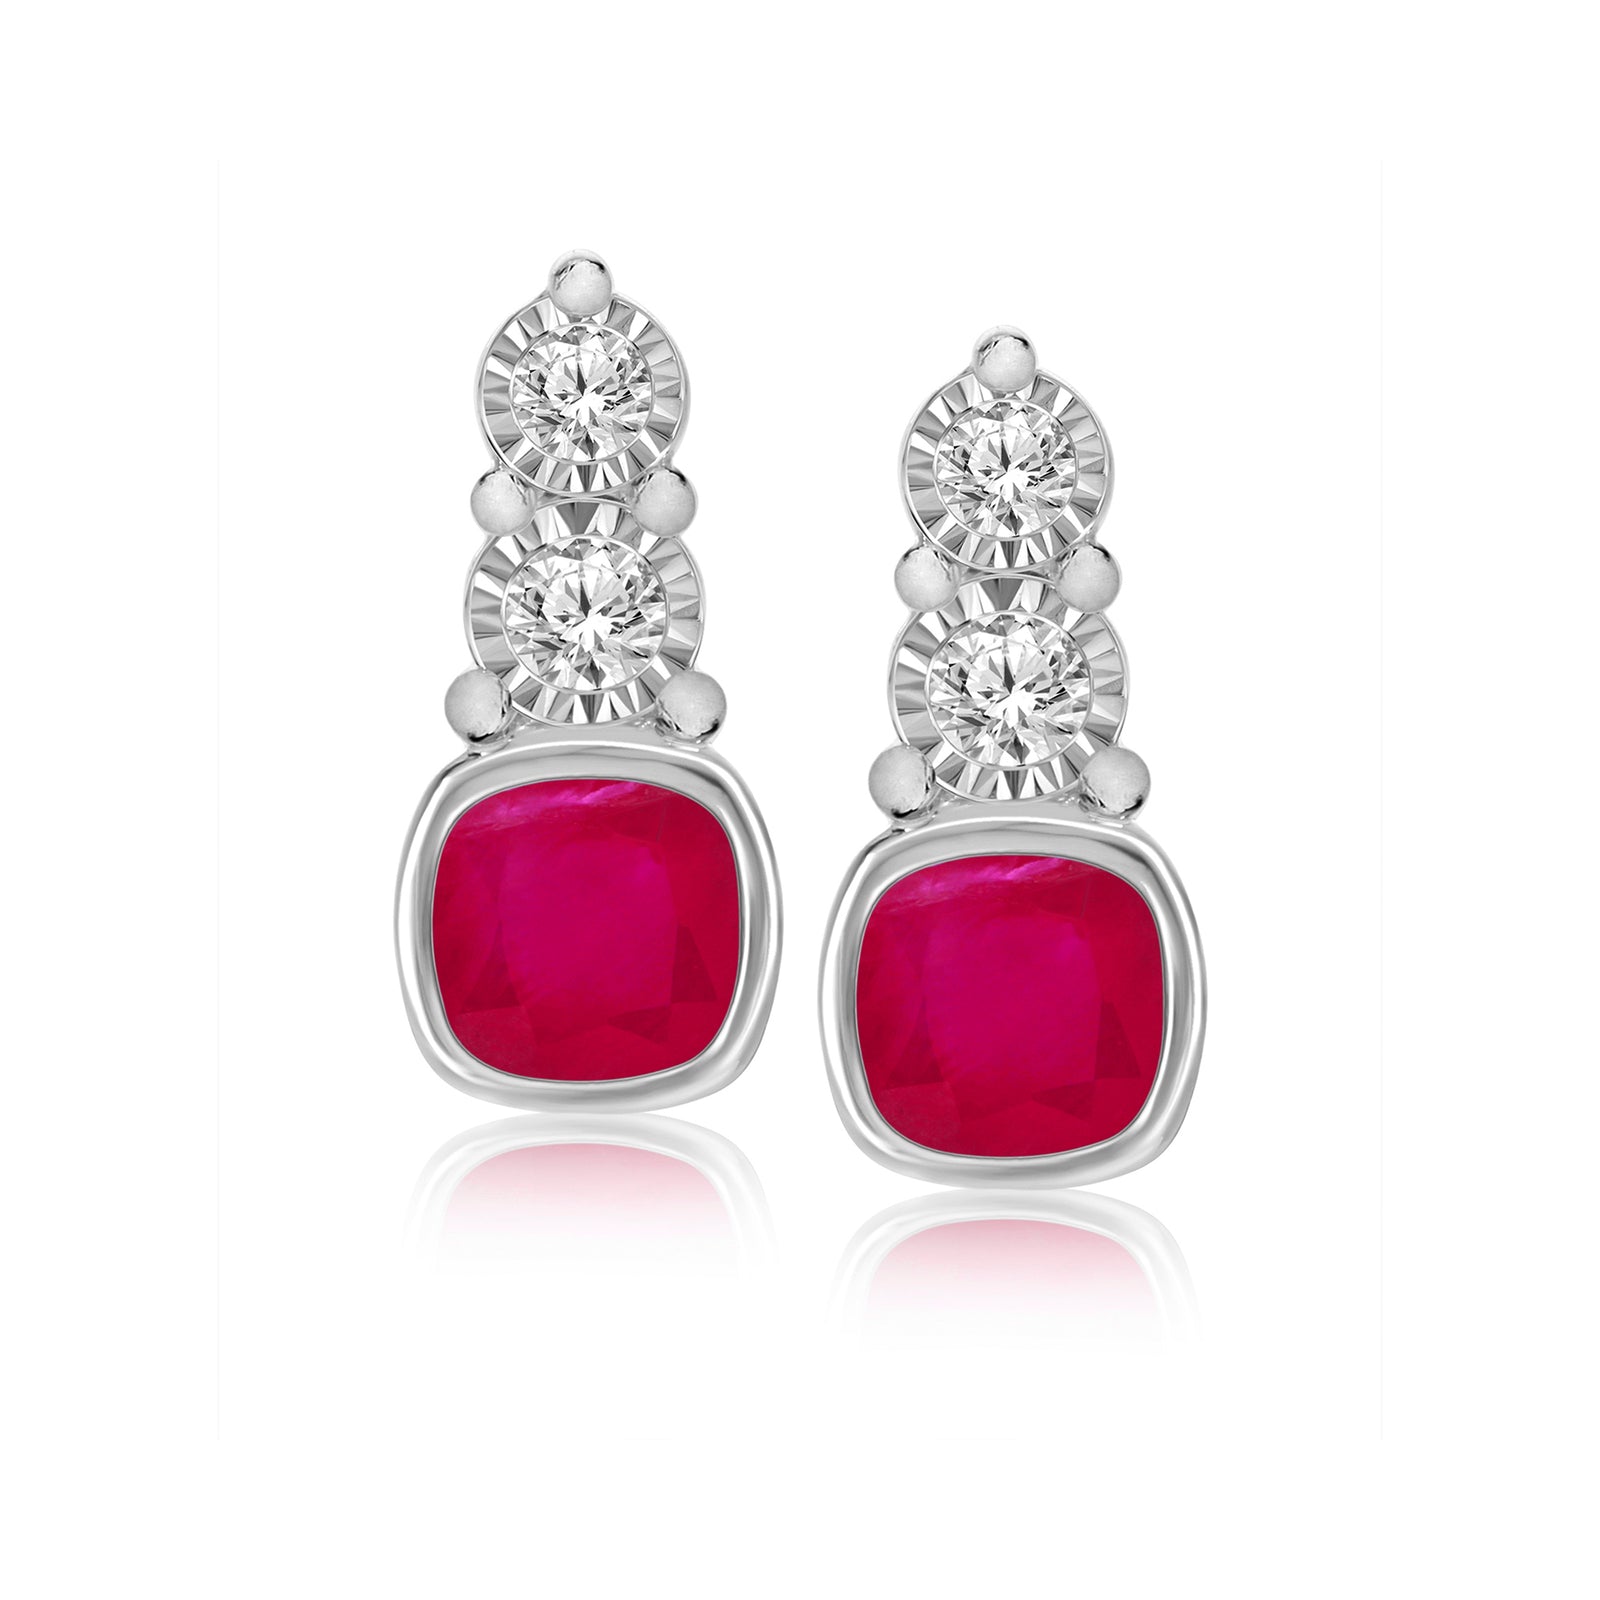 9ct white gold 4mm cushion shape ruby & miracle plate diamond studs earrings 0.06ct